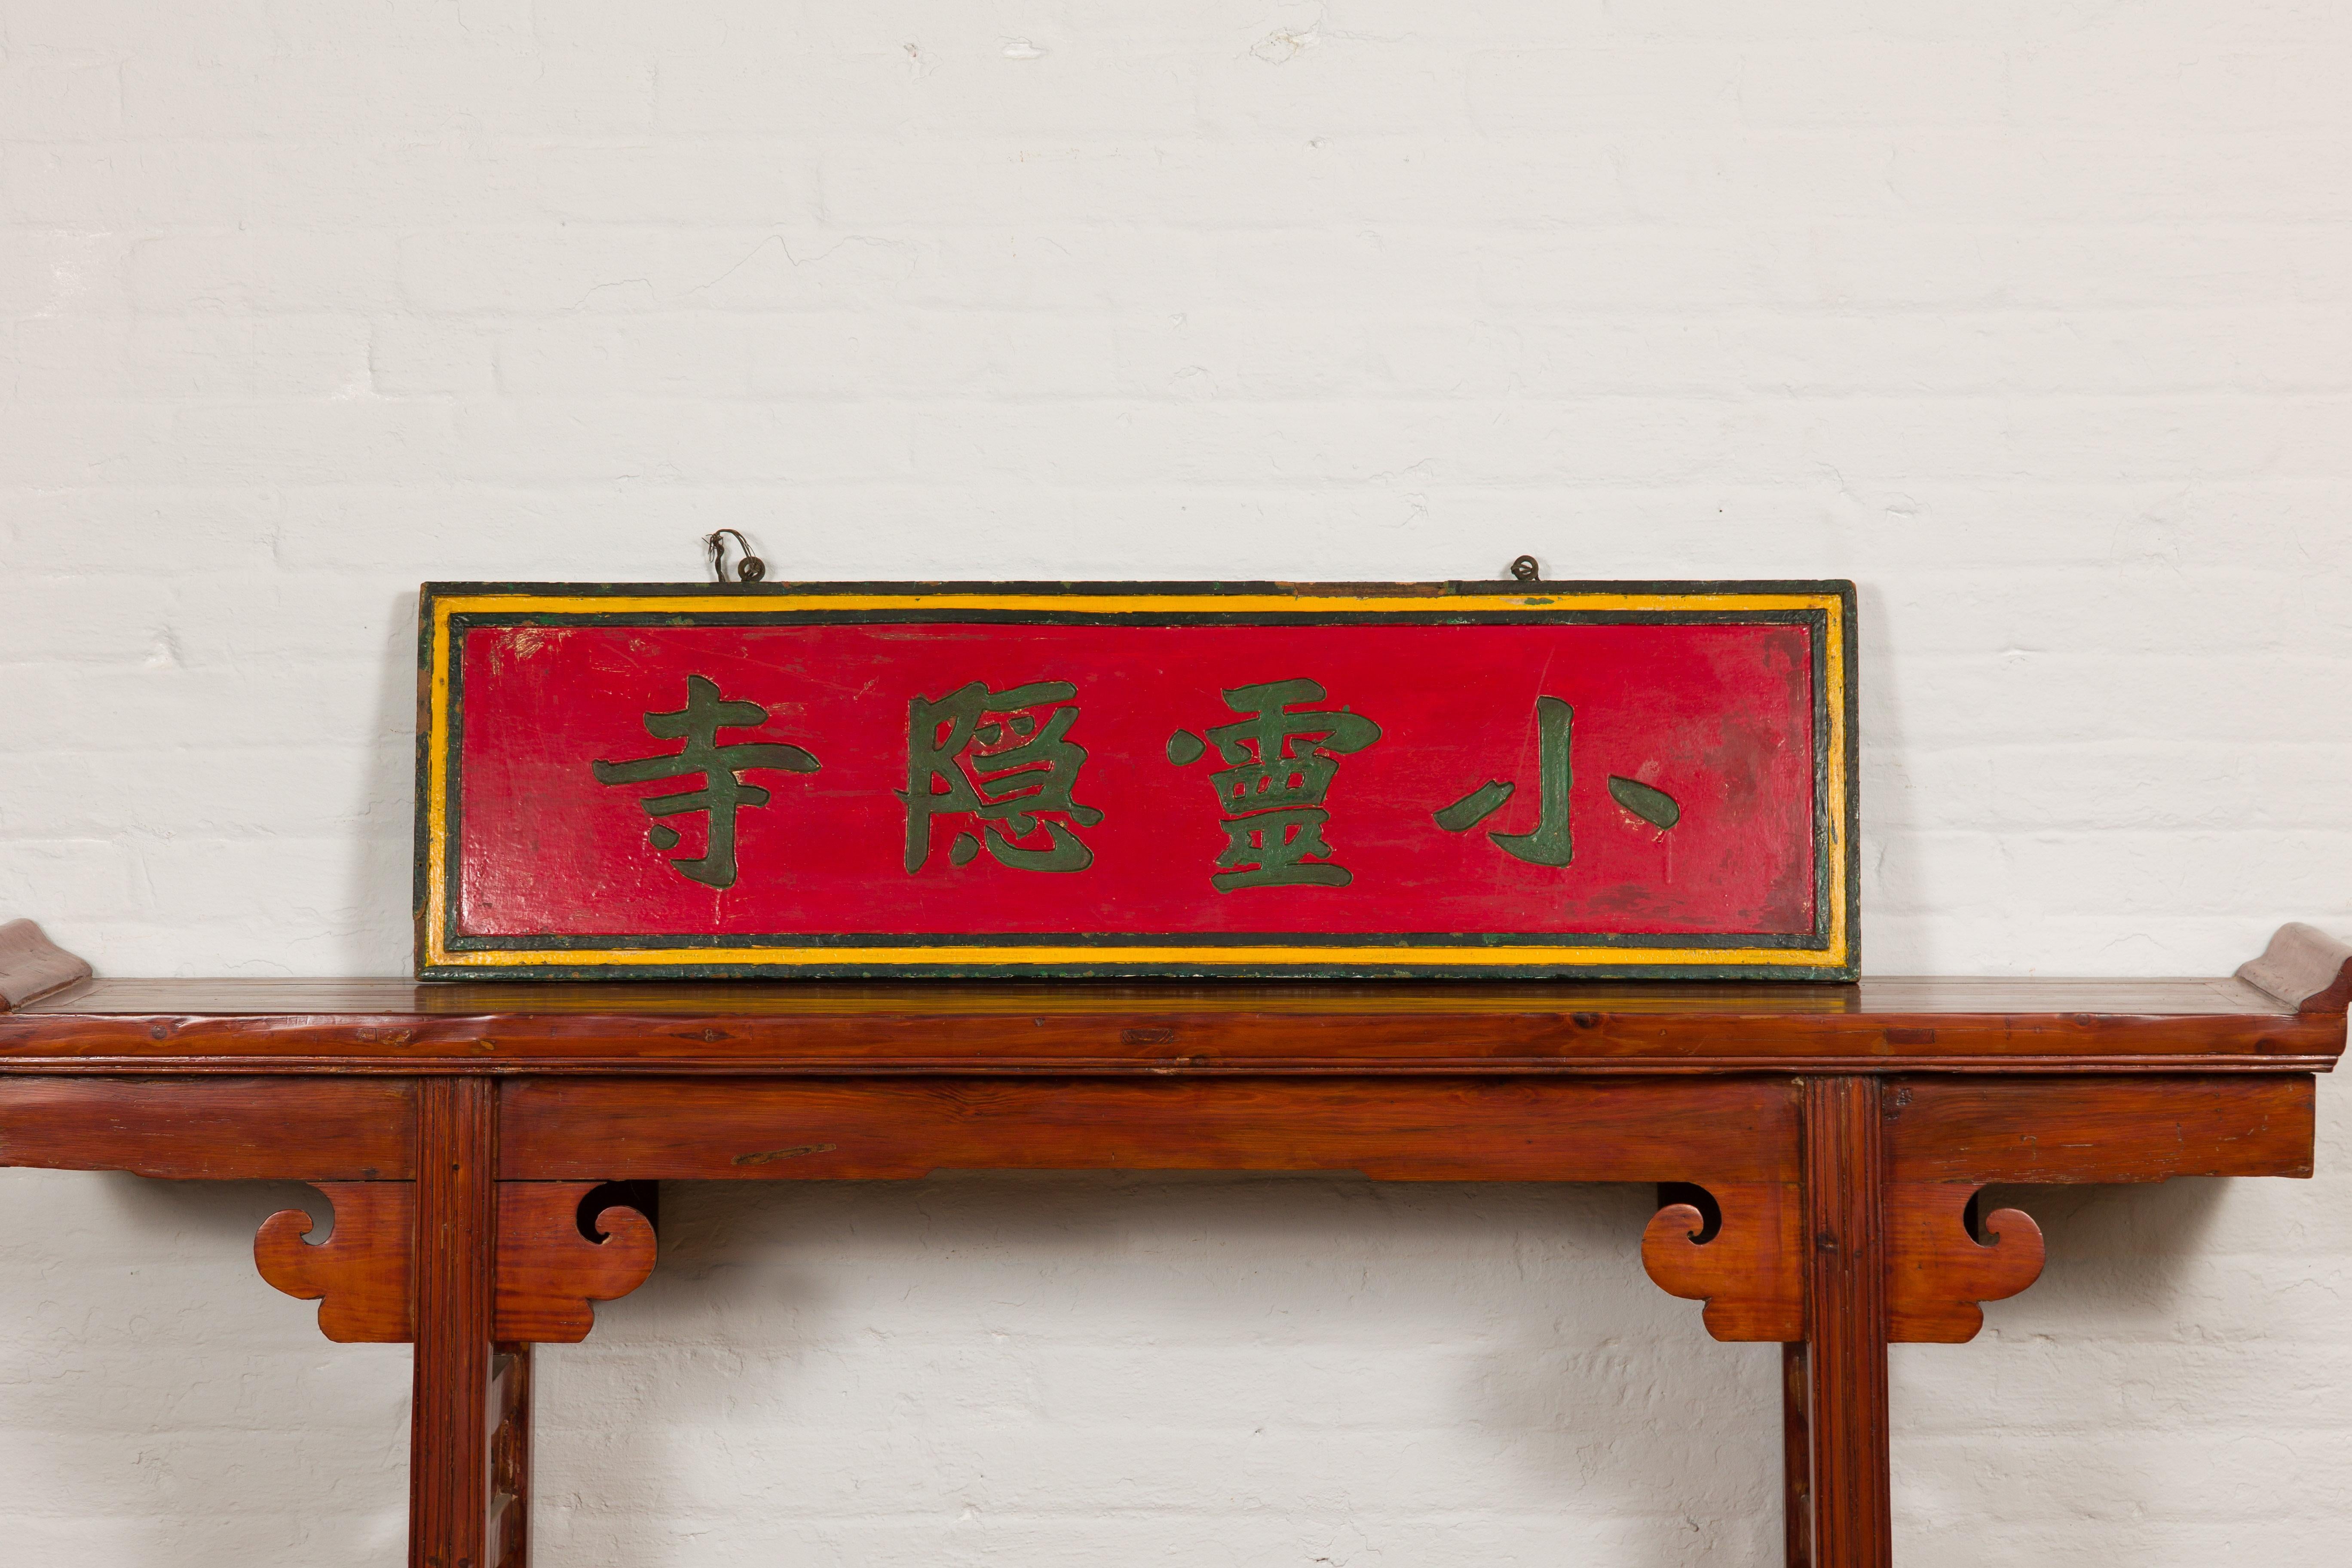 A Chinese late Qing Dynasty period red lacquered shop sign with hand carved calligraphy and black and yellow frame. Showcasing a rich history, this late Qing Dynasty period Chinese shop sign is an elegant piece that transports you to a bygone era.